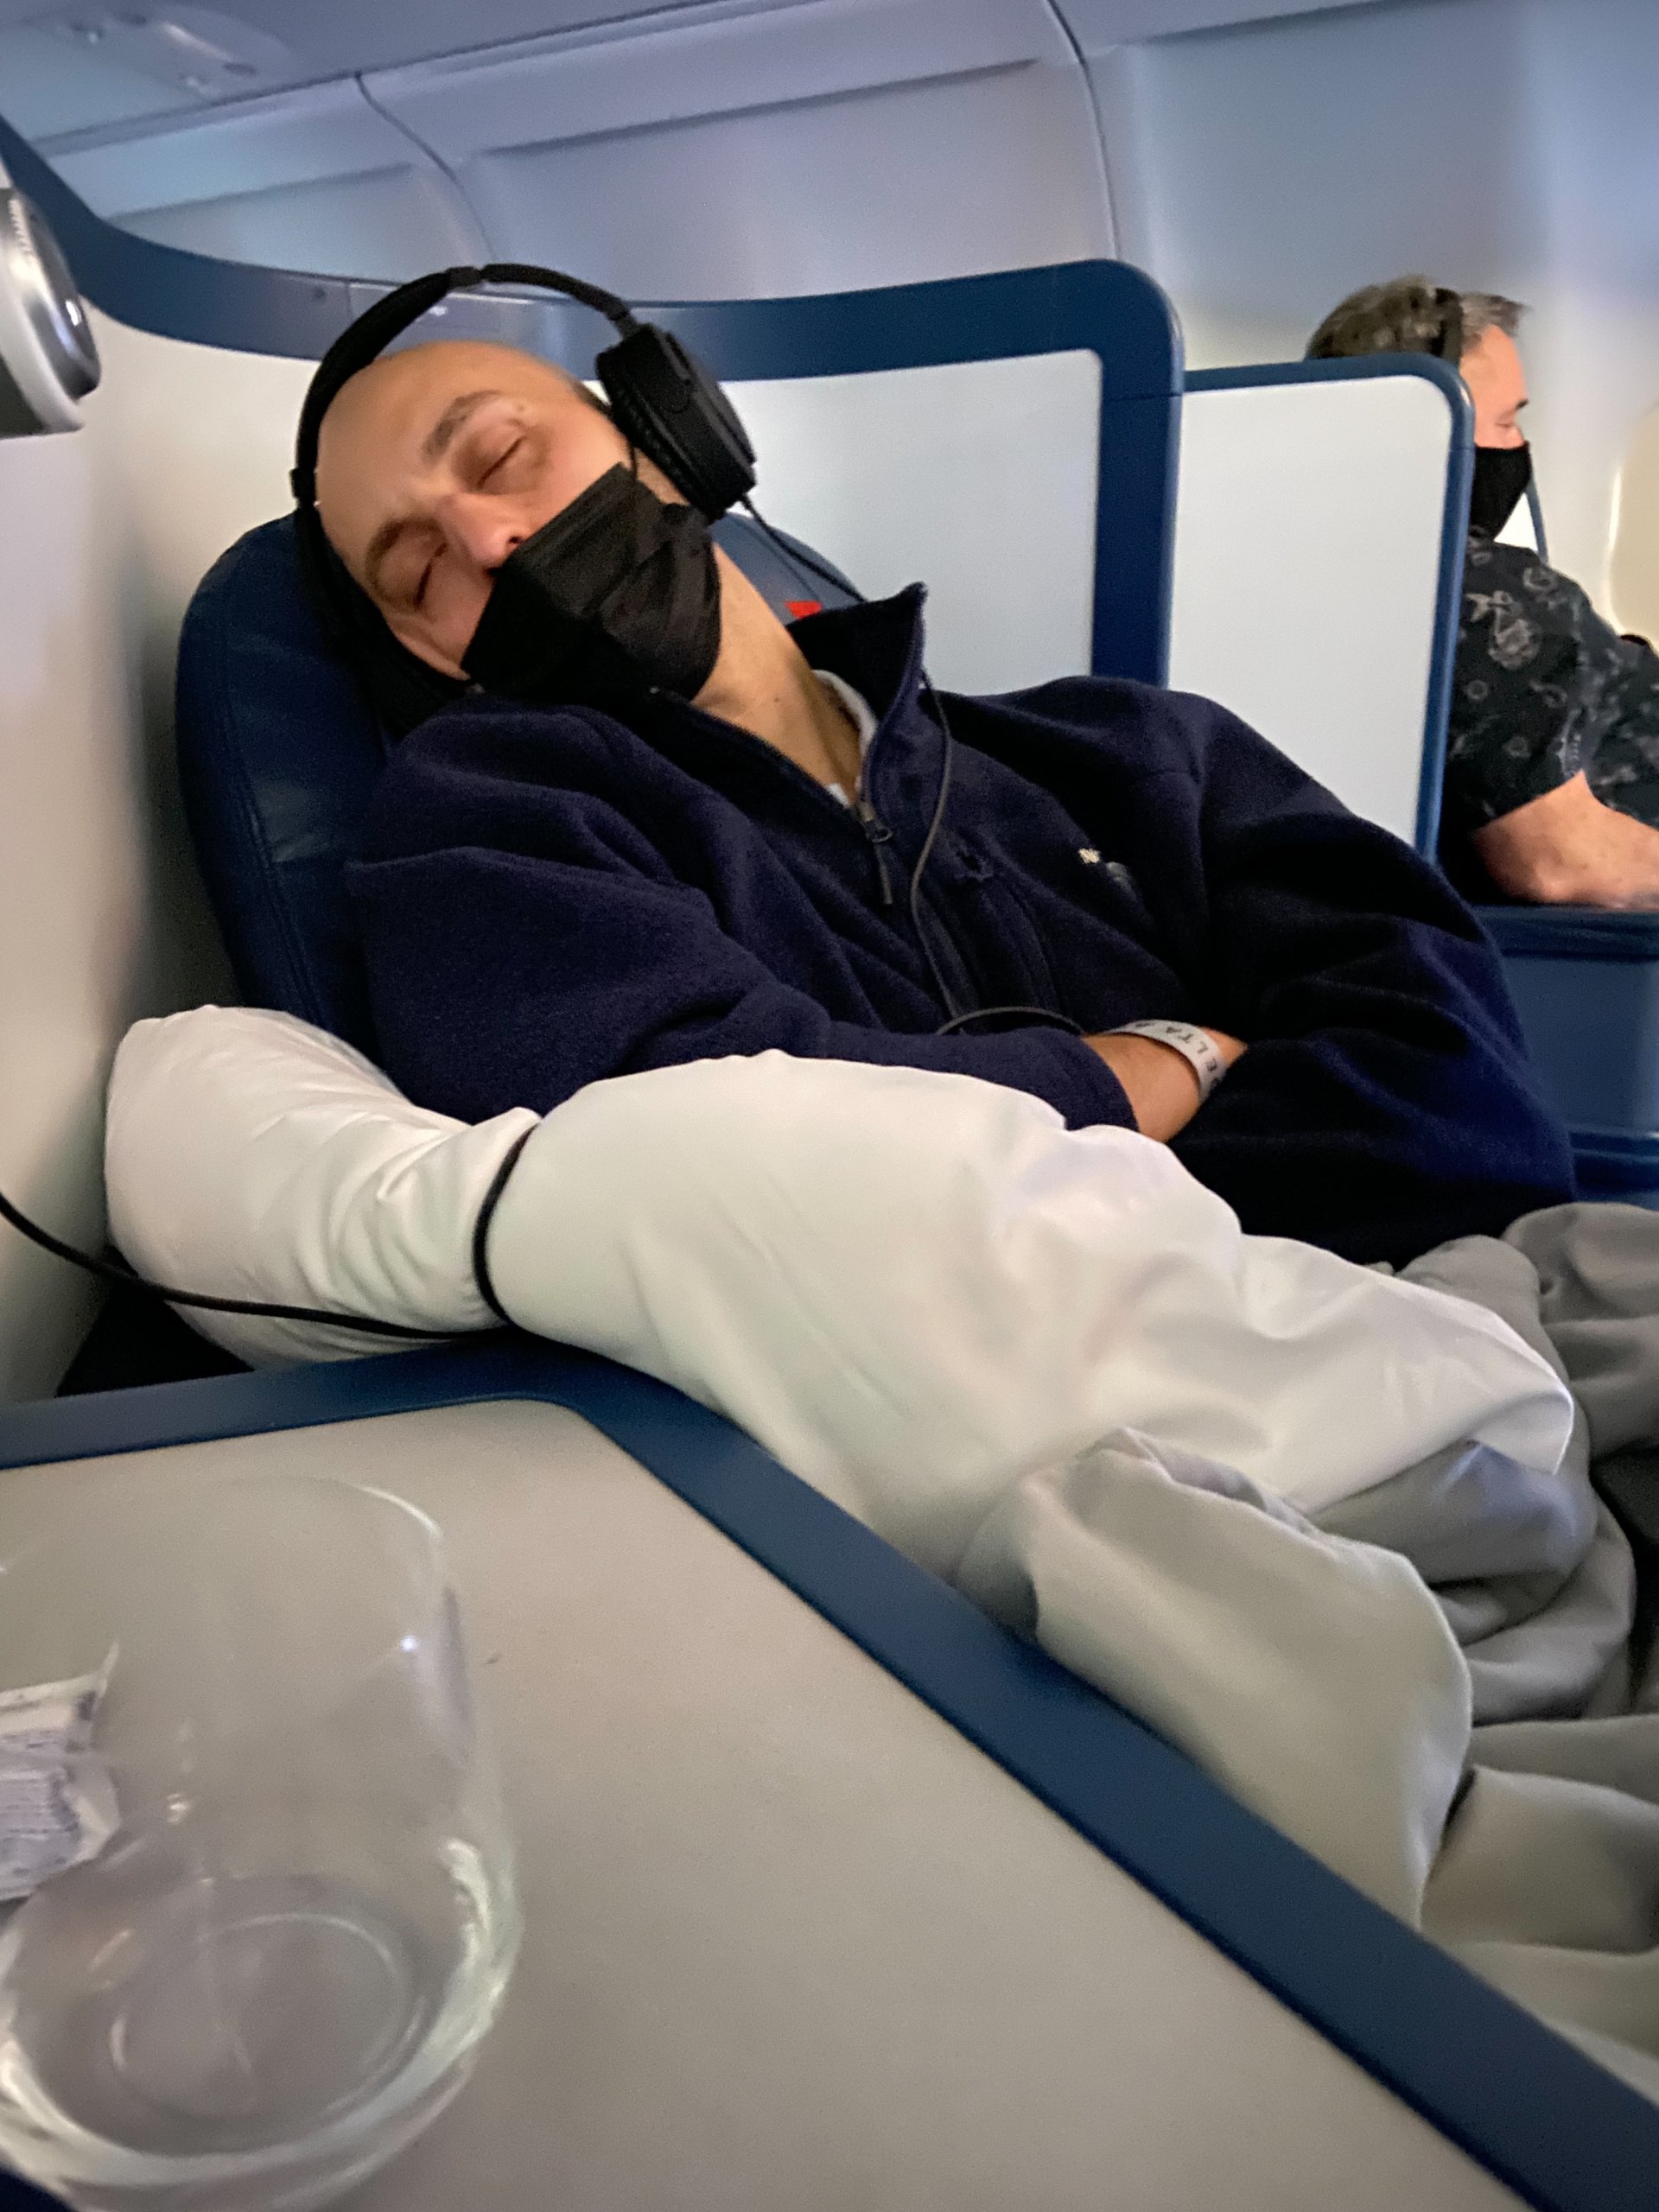 Man sleeping in business class seat on airplane.